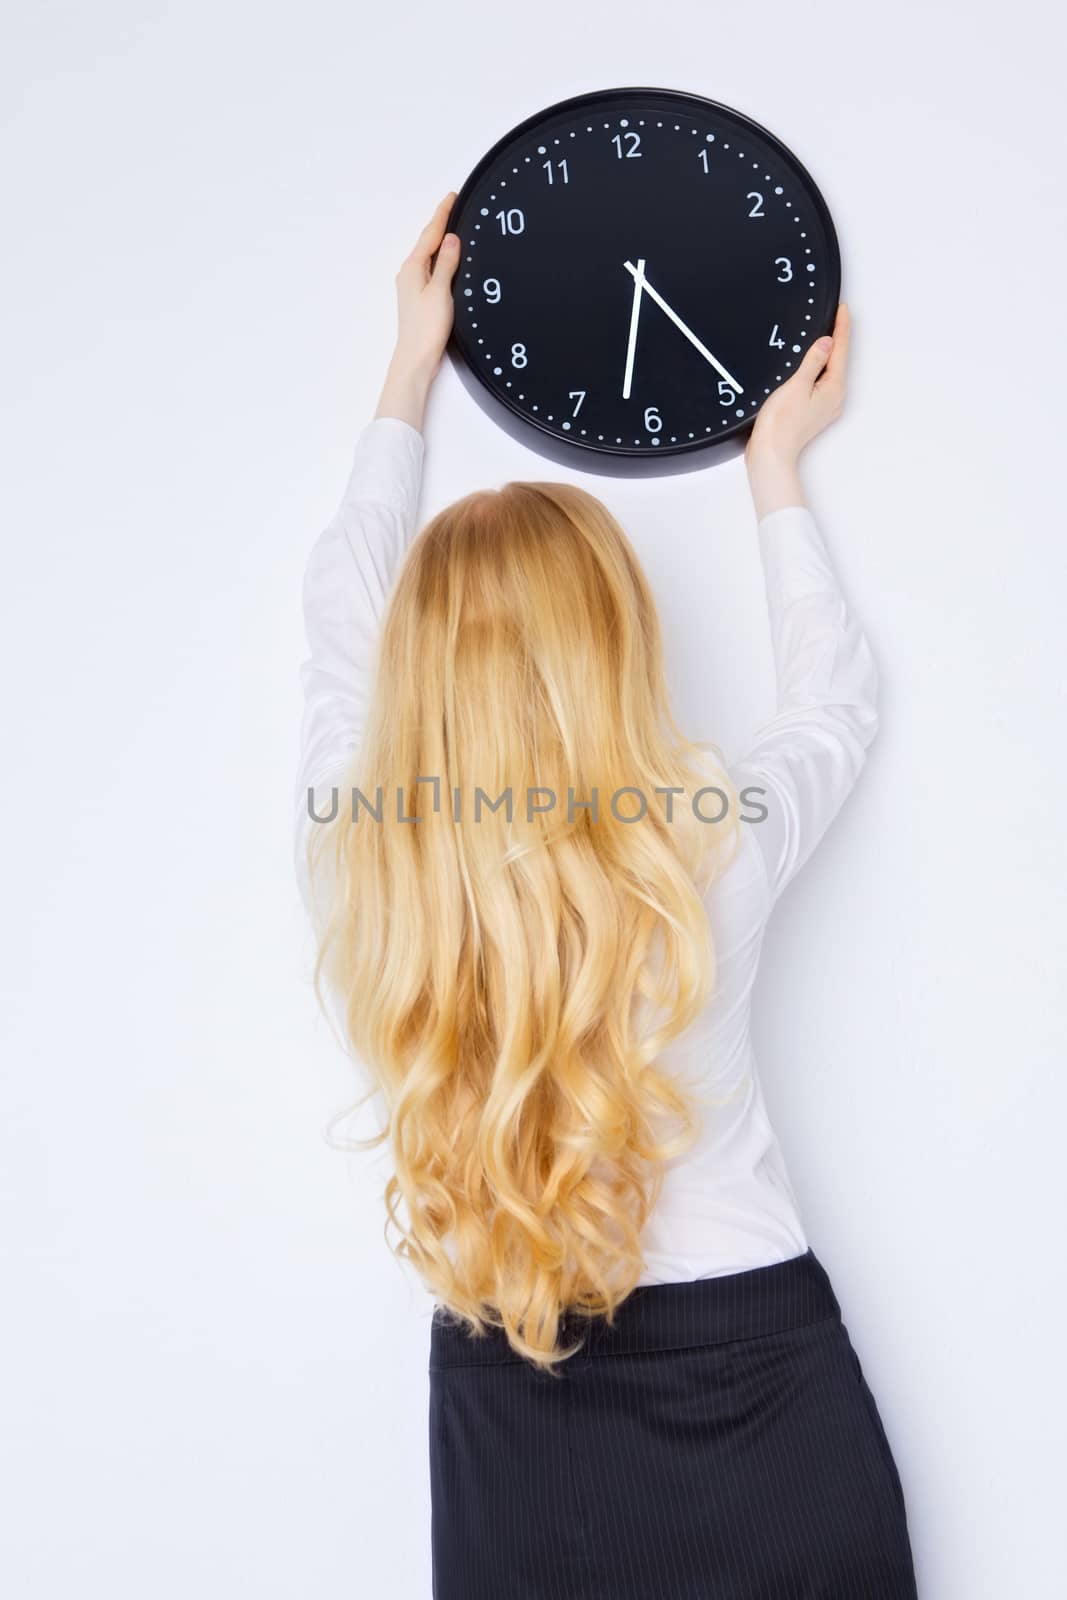 office girl sets the clock to end of work day